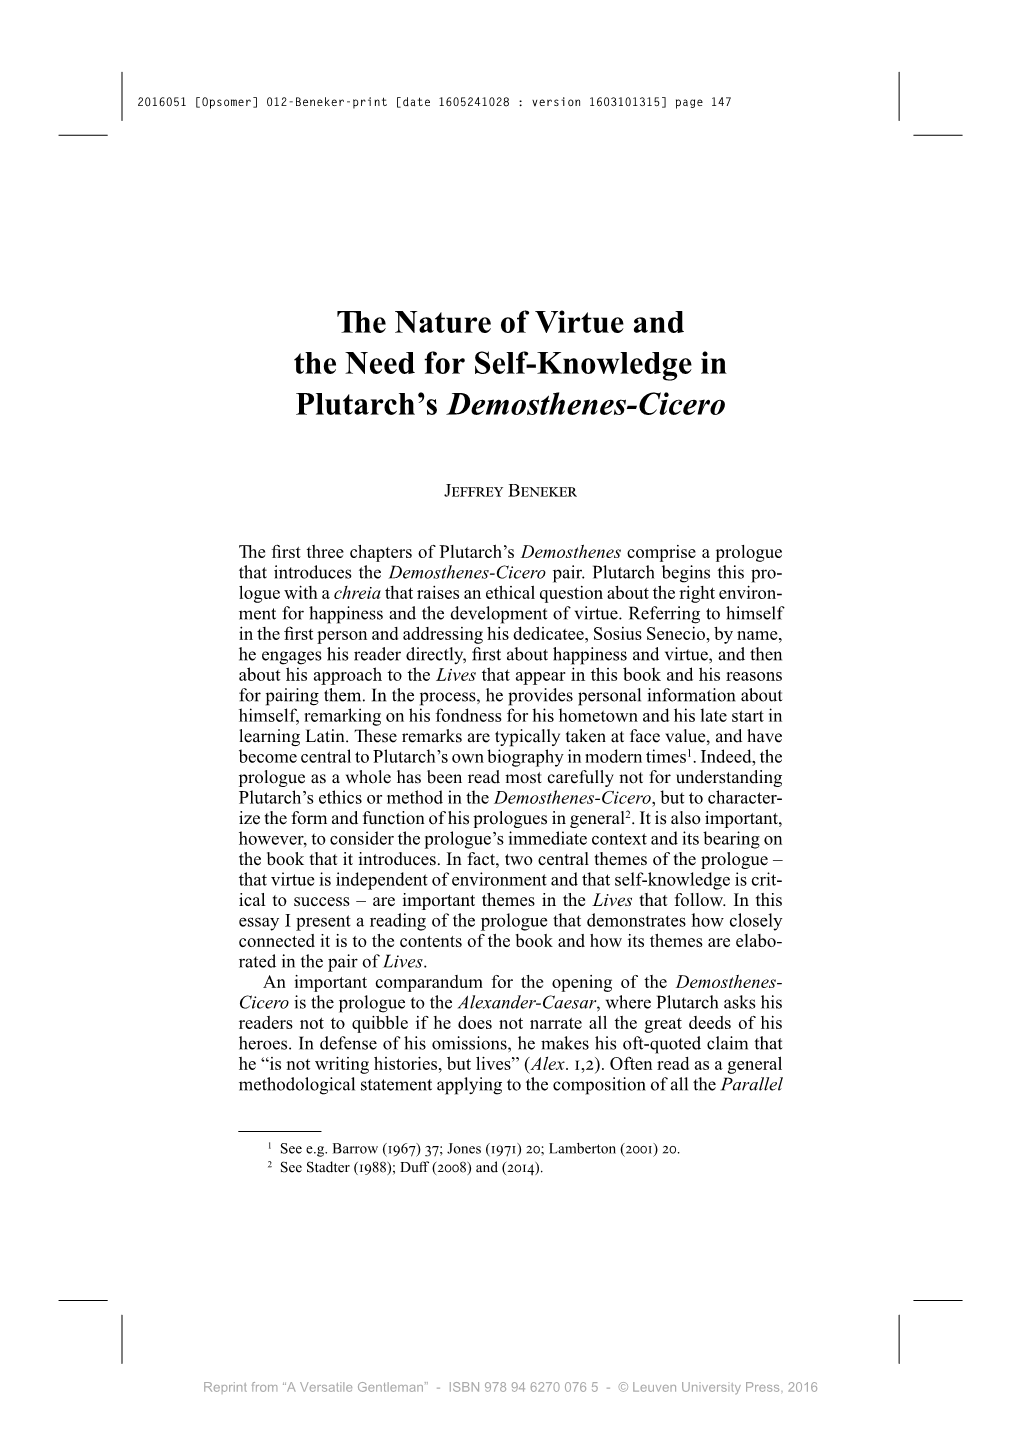 The Nature of Virtue and the Need for Self-Knowledge in Plutarch's Demosthenes-Cicero